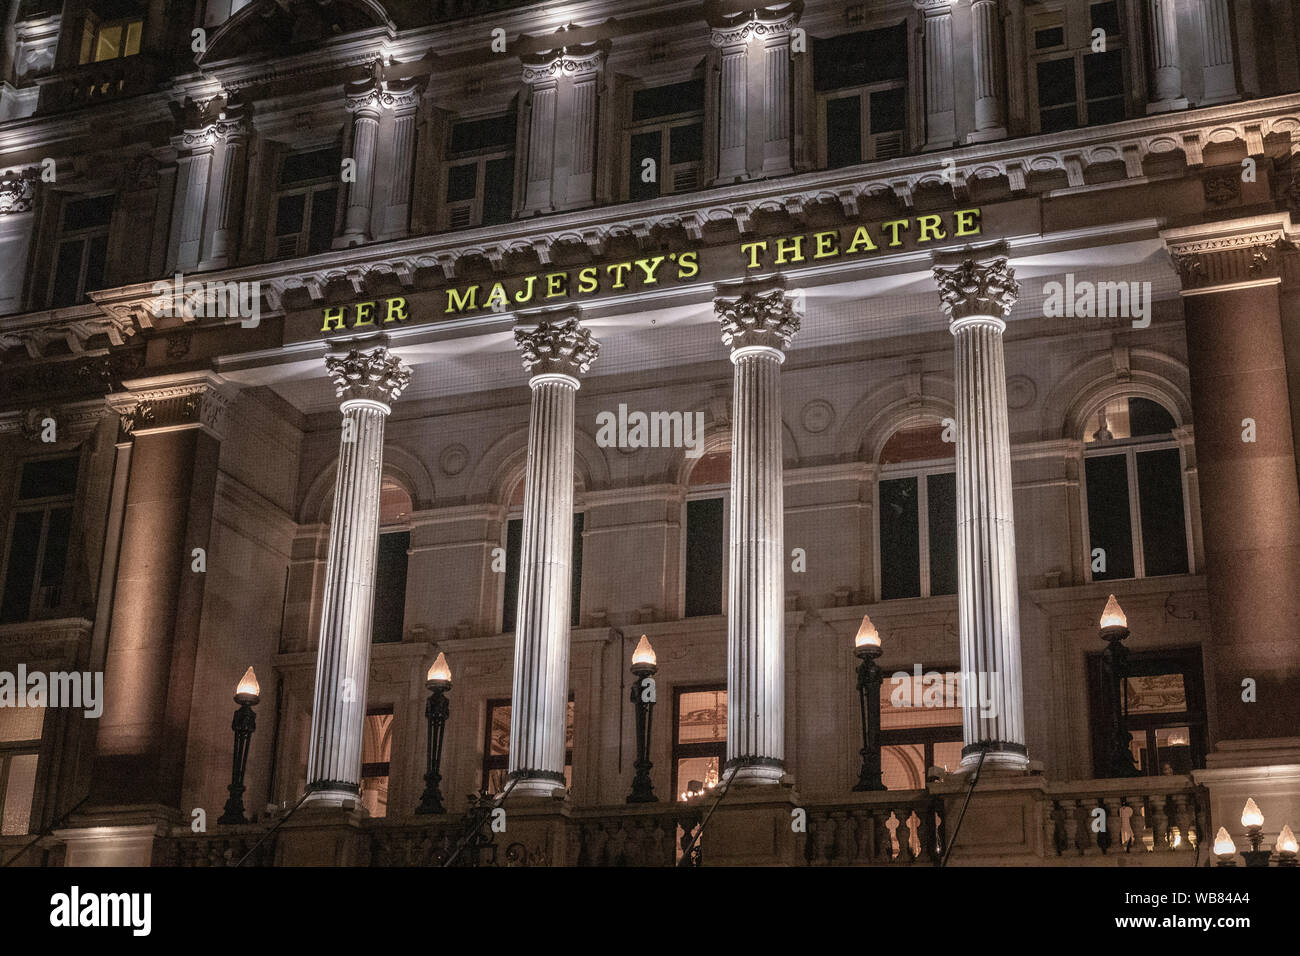 Her Majesty's Theatre at night in London. Stock Photo